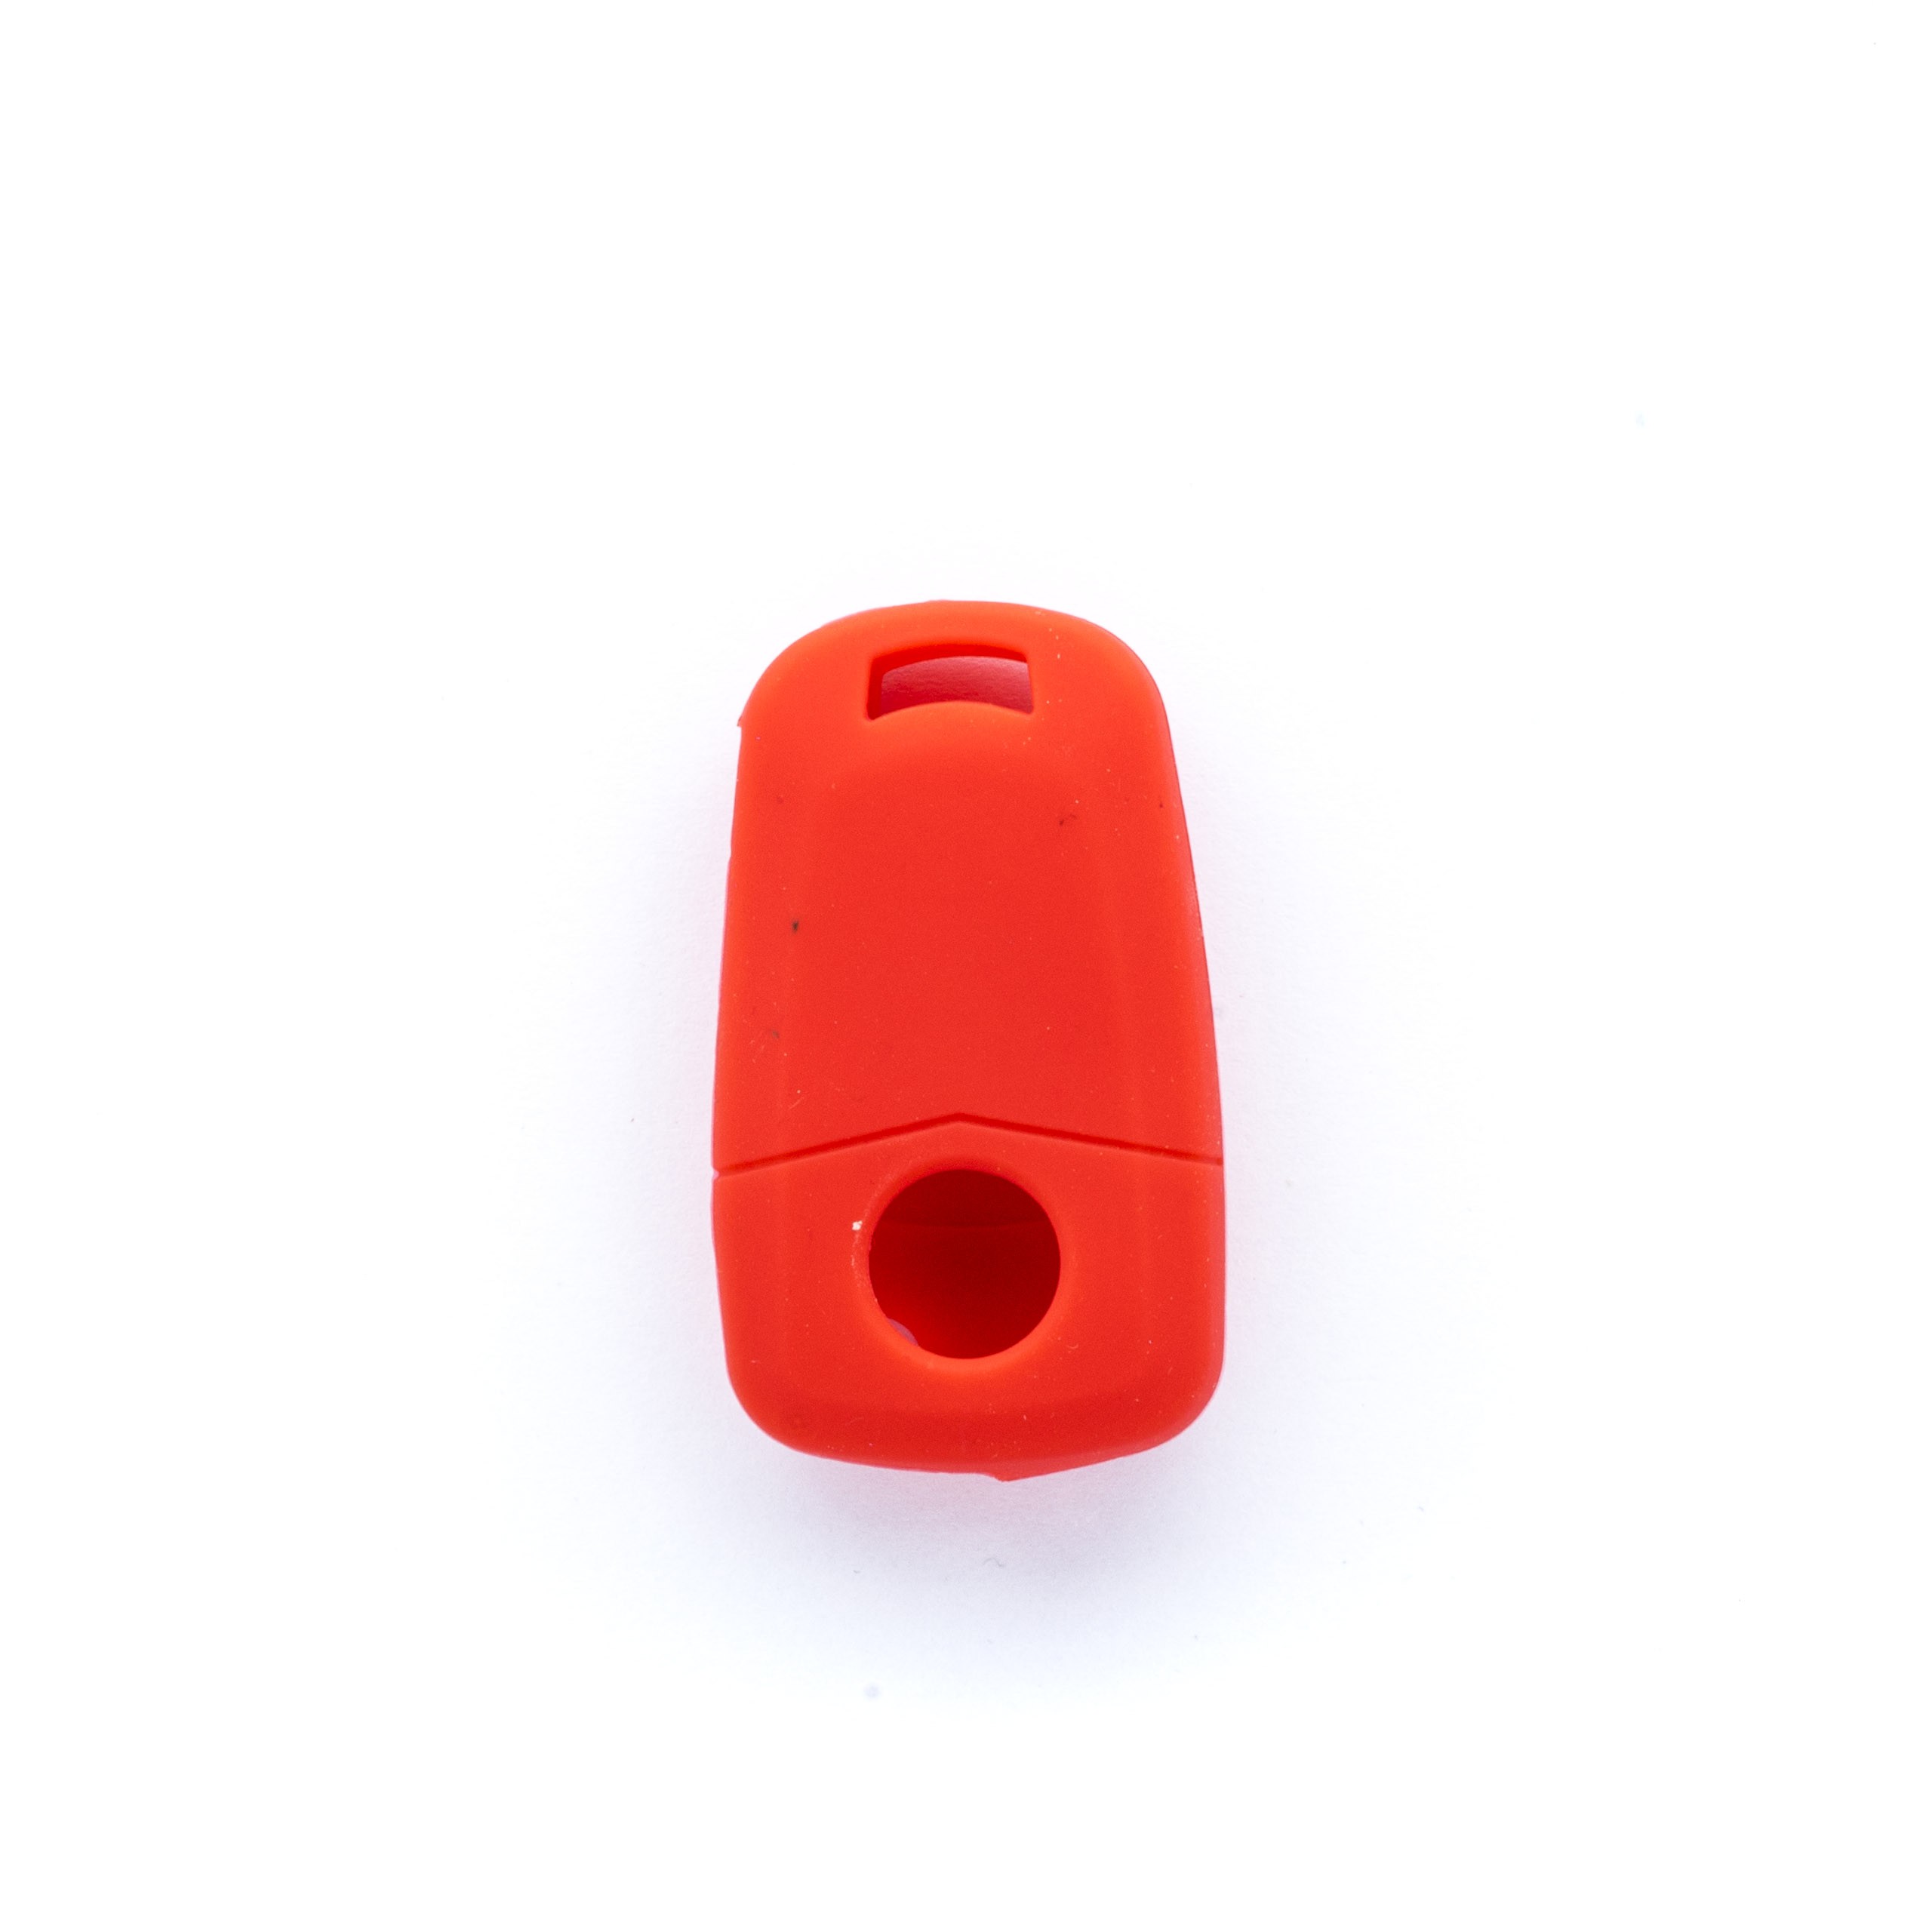 EPKC39 RED CAR KEY COVER OPEL